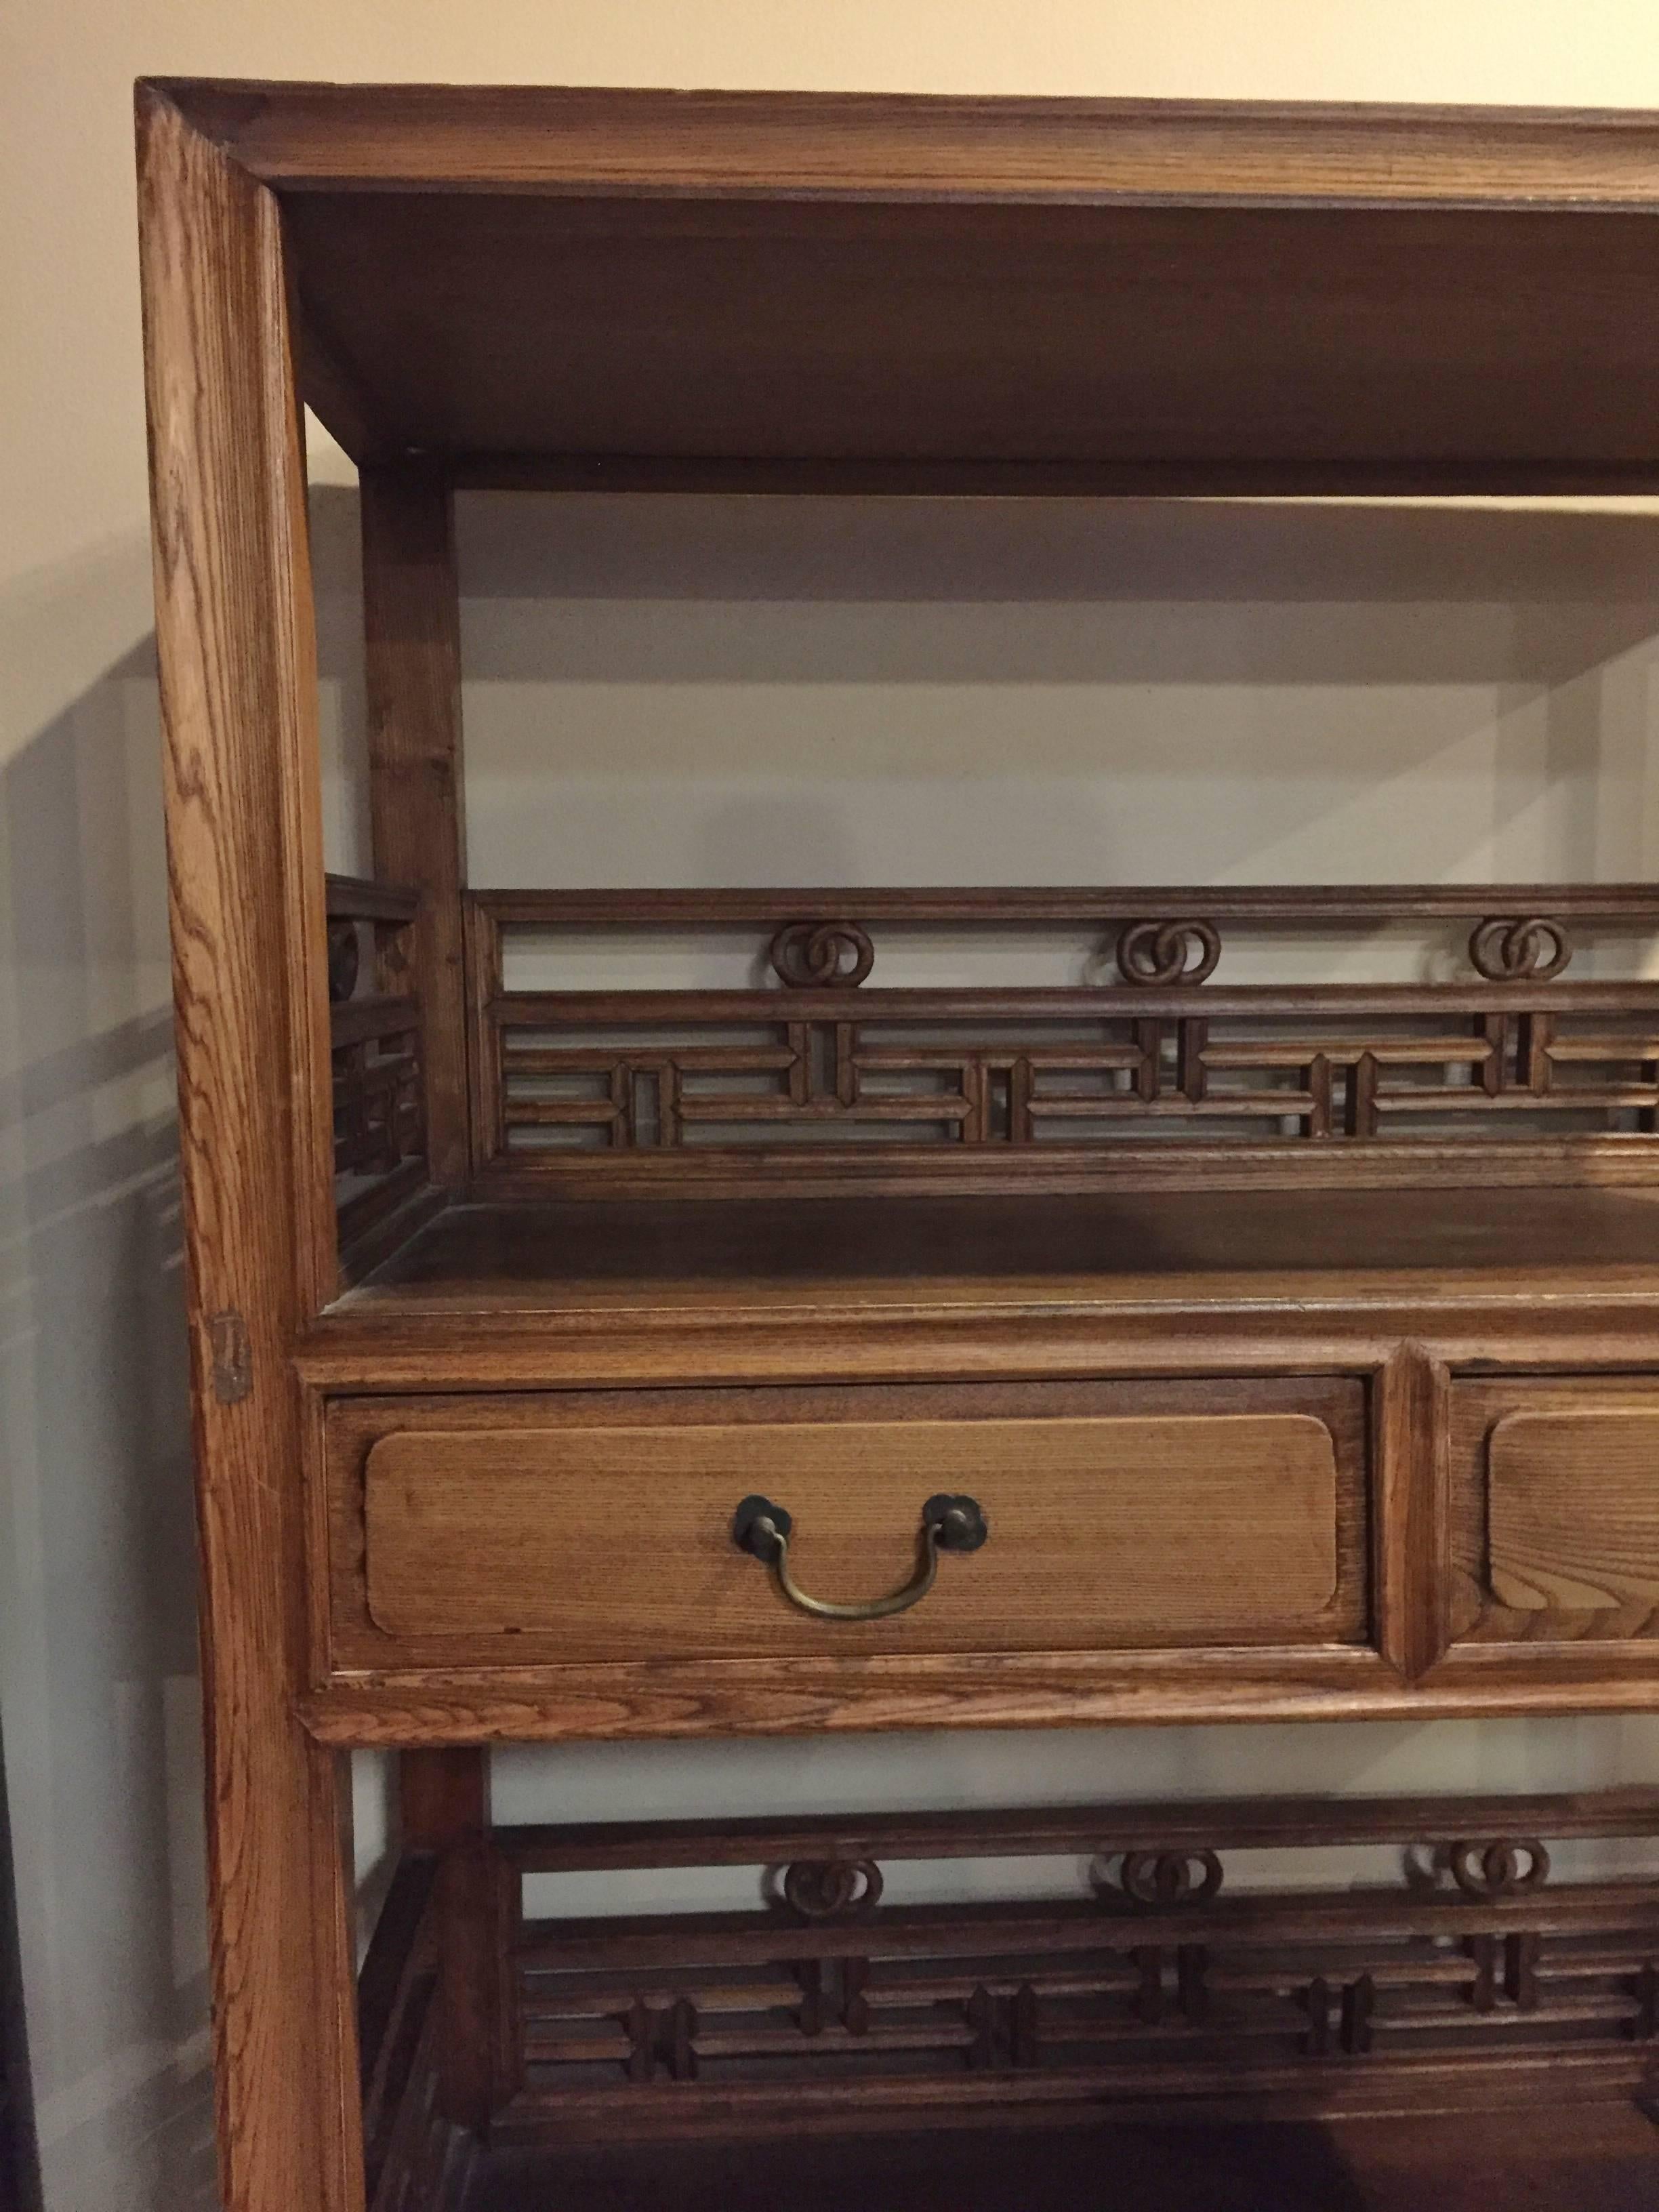 A pair of elegant Chinese bookcase. 

The solid wood bookcase has an open design with three levels and two drawers. Beautiful rings and lattice work decorate the pieces adding more visual interest. Choice elmwood was chosen for the bookcase.